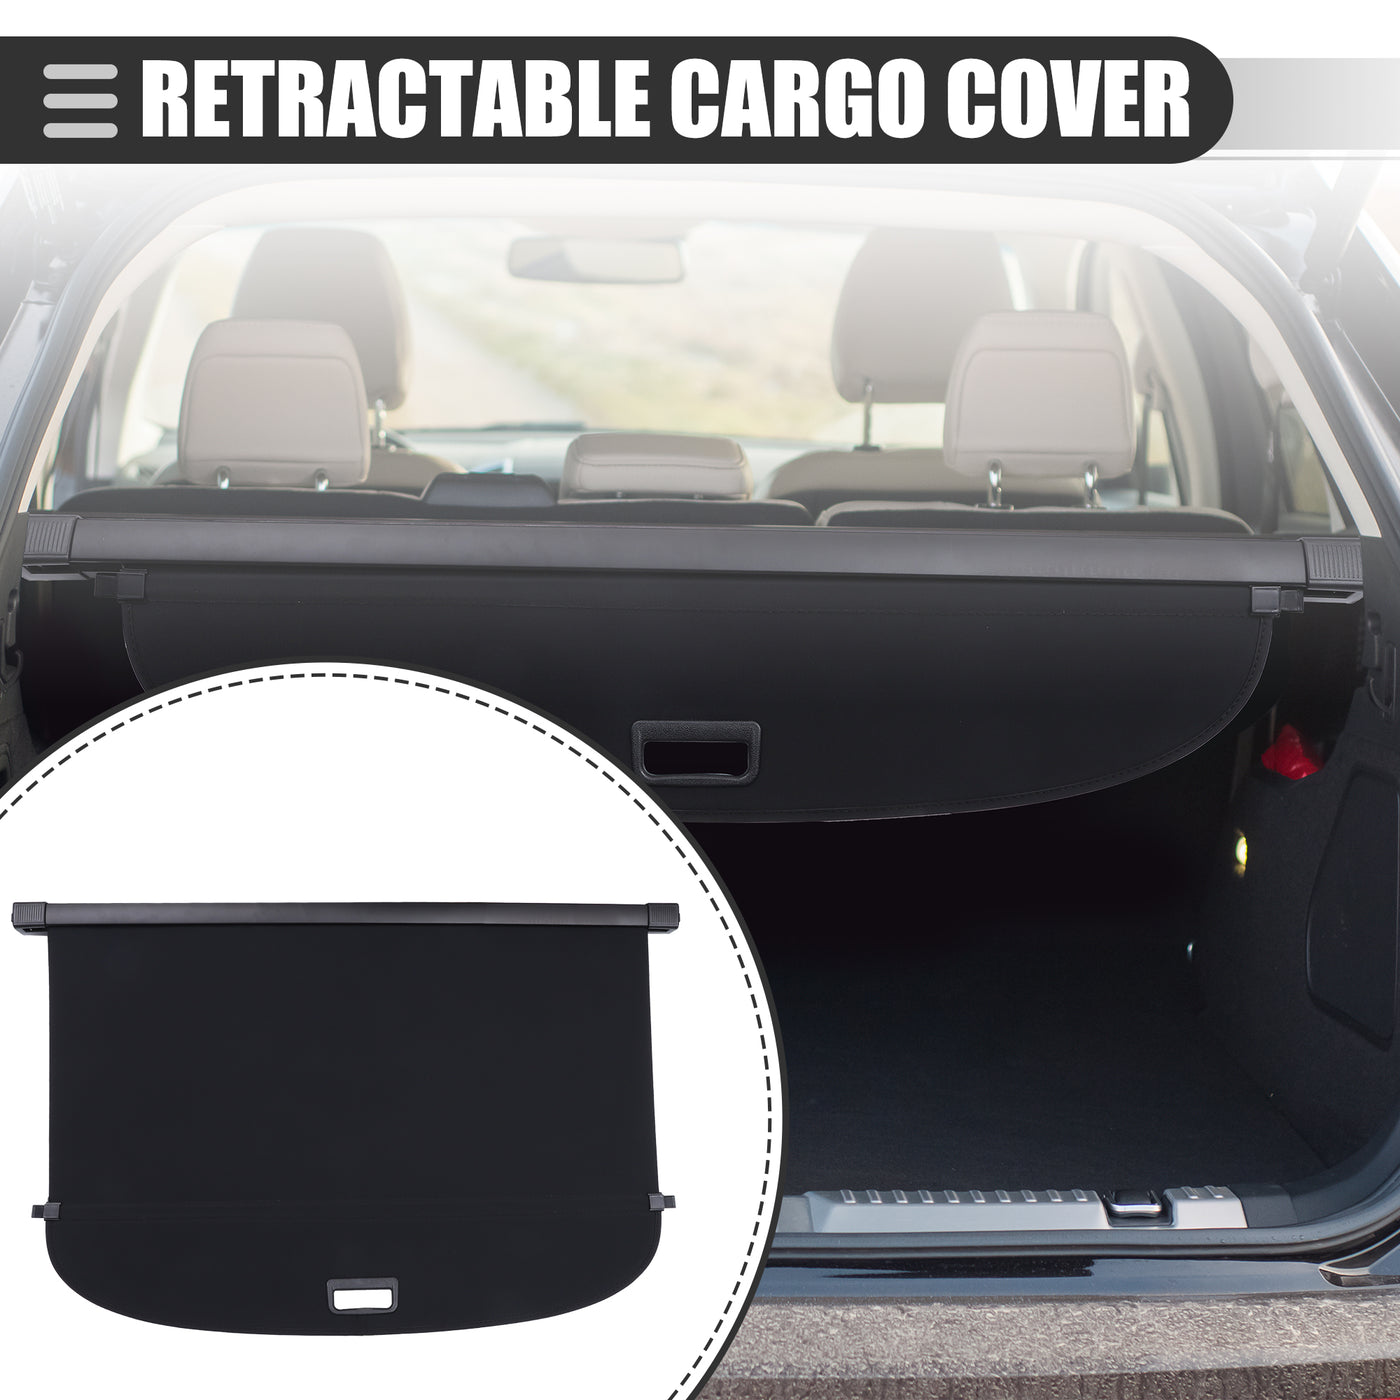 Motoforti Retractable Cargo Cover, Heat Resistant Rear Trunk Secure Cover Shield Shade, for Acura RDX 2019 2020 2021, Waterproof Canvas, Black